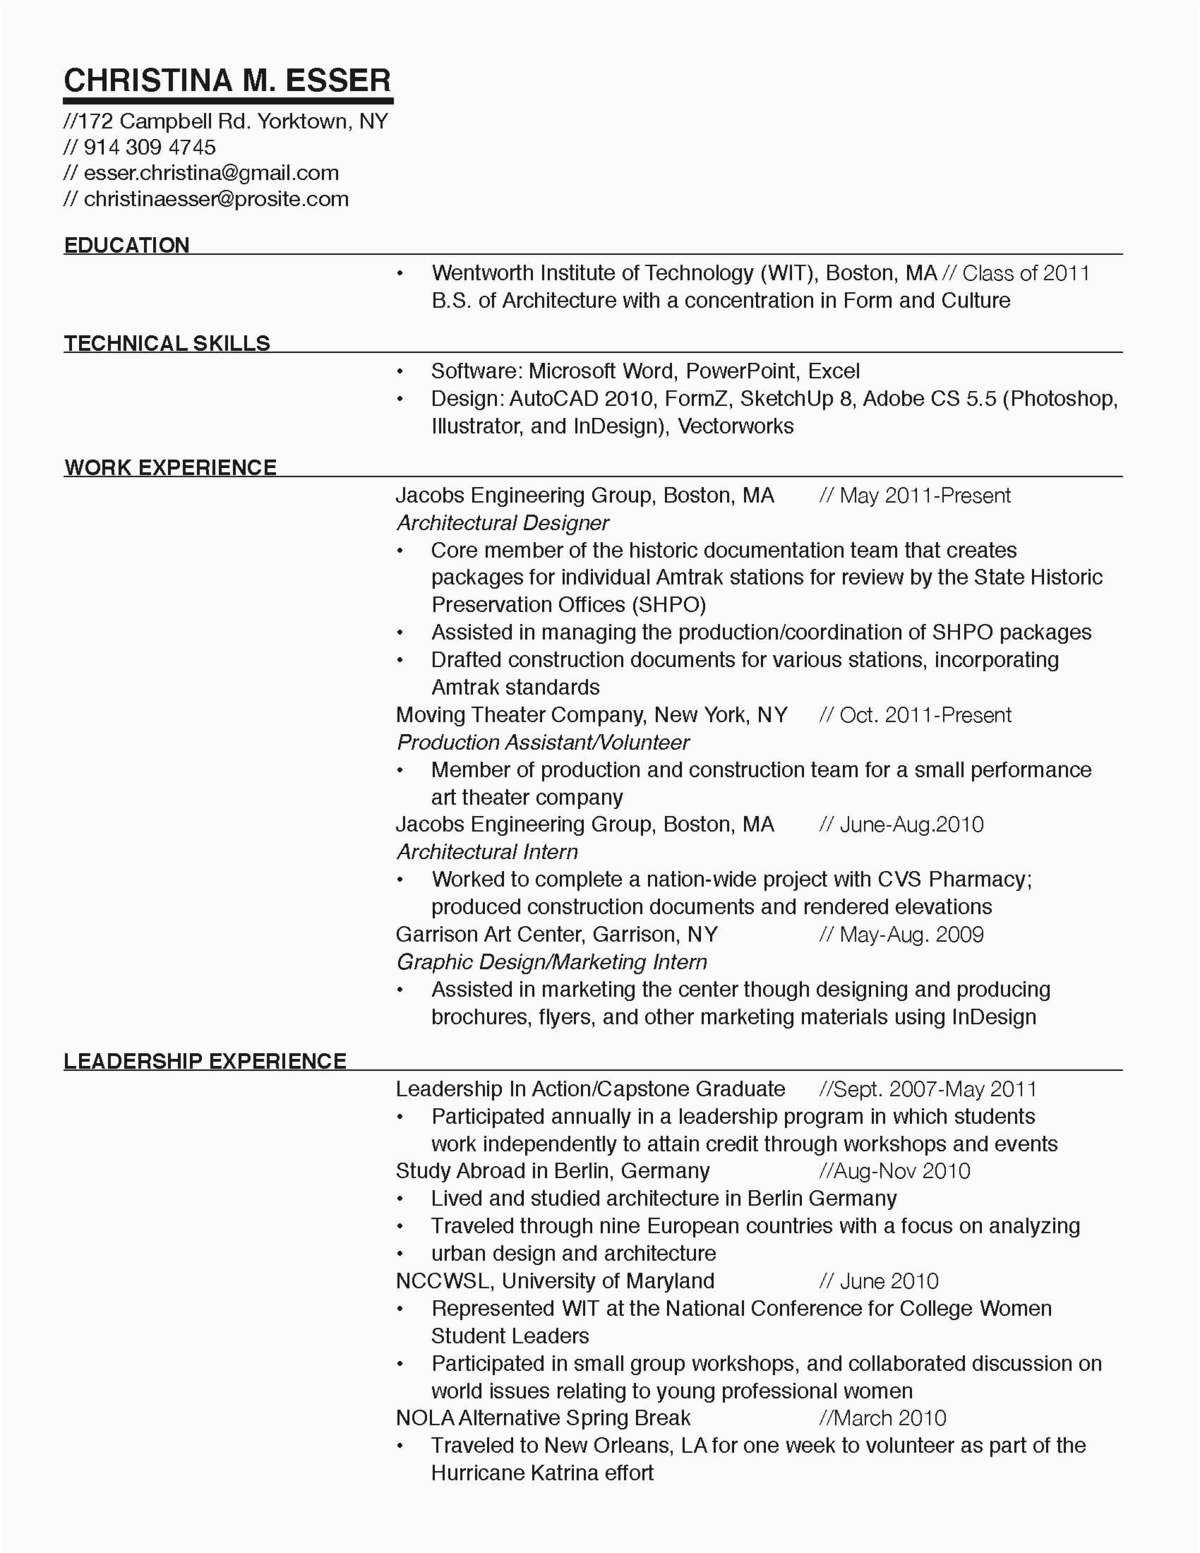 Sample Resume for Movie theater Manager Resume format Resume for Movie theater Employee